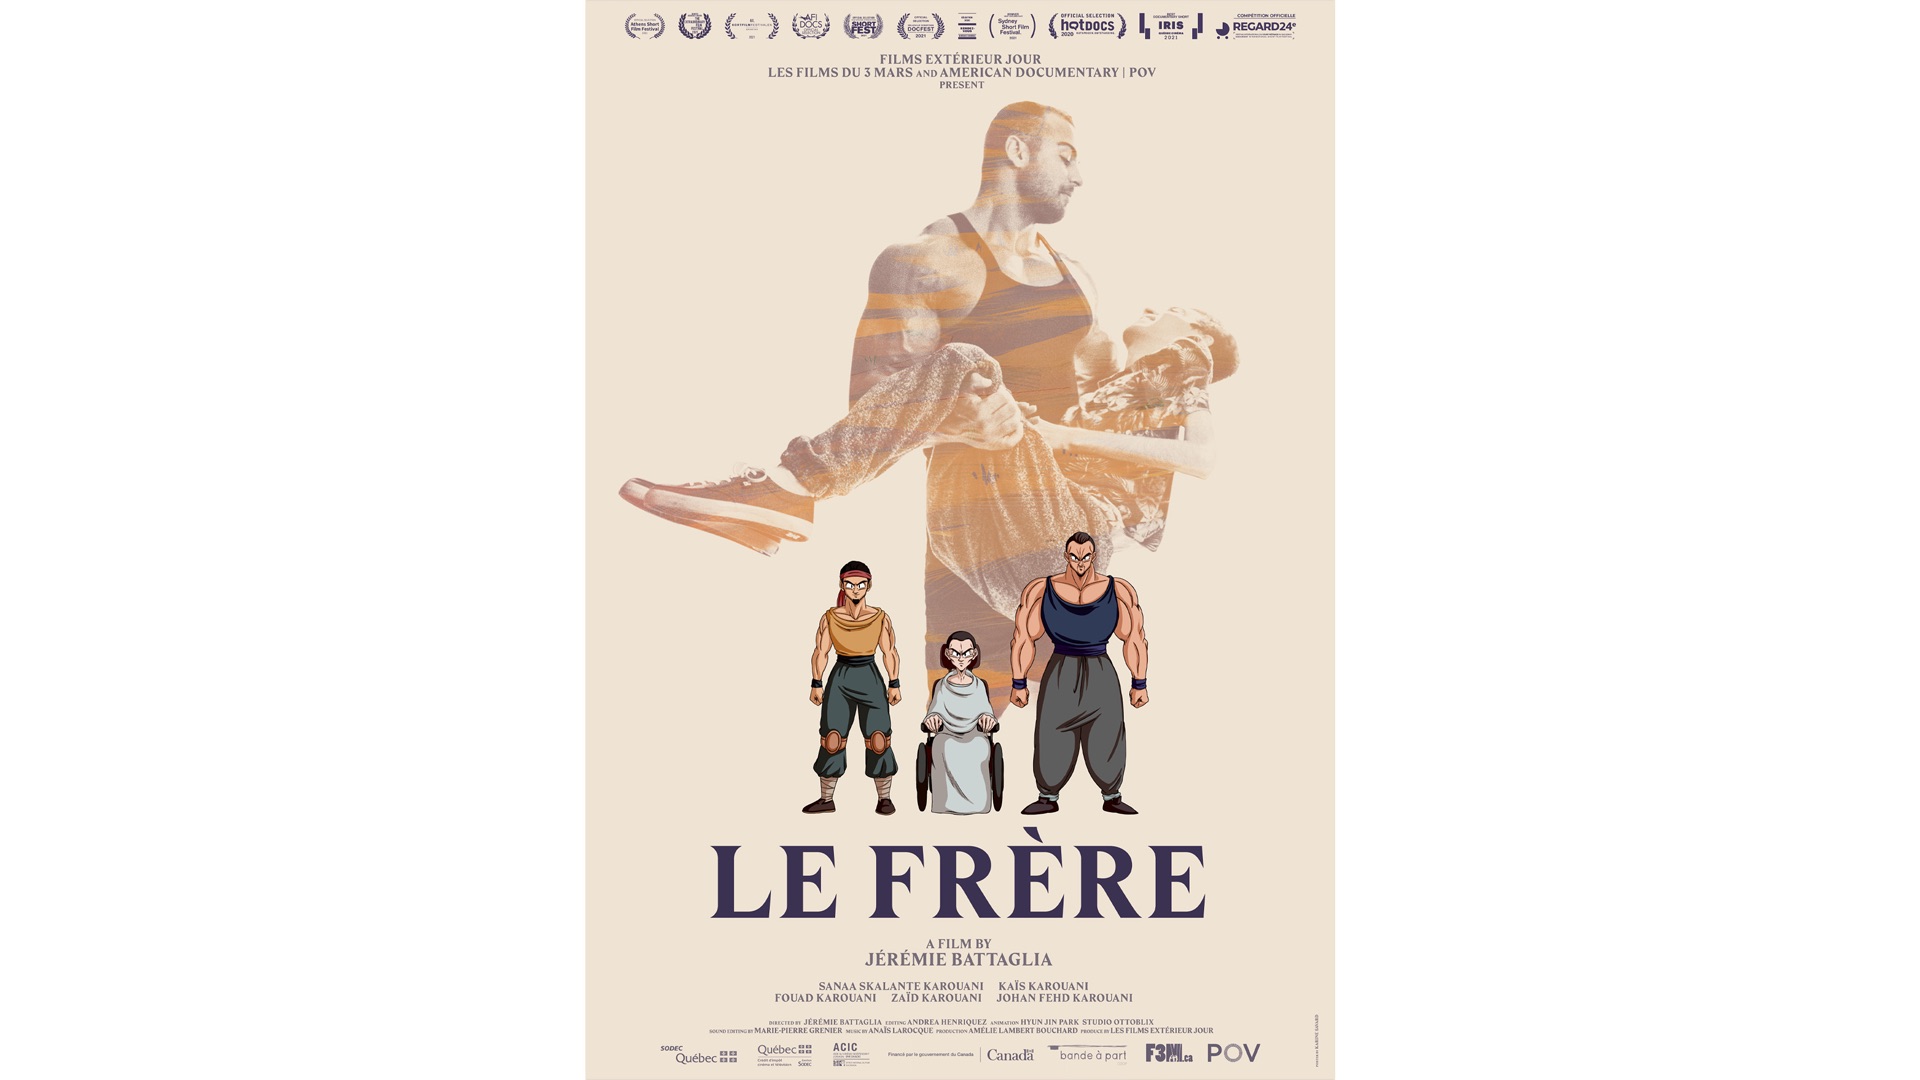 Le frère (the brother) | Documentary short film